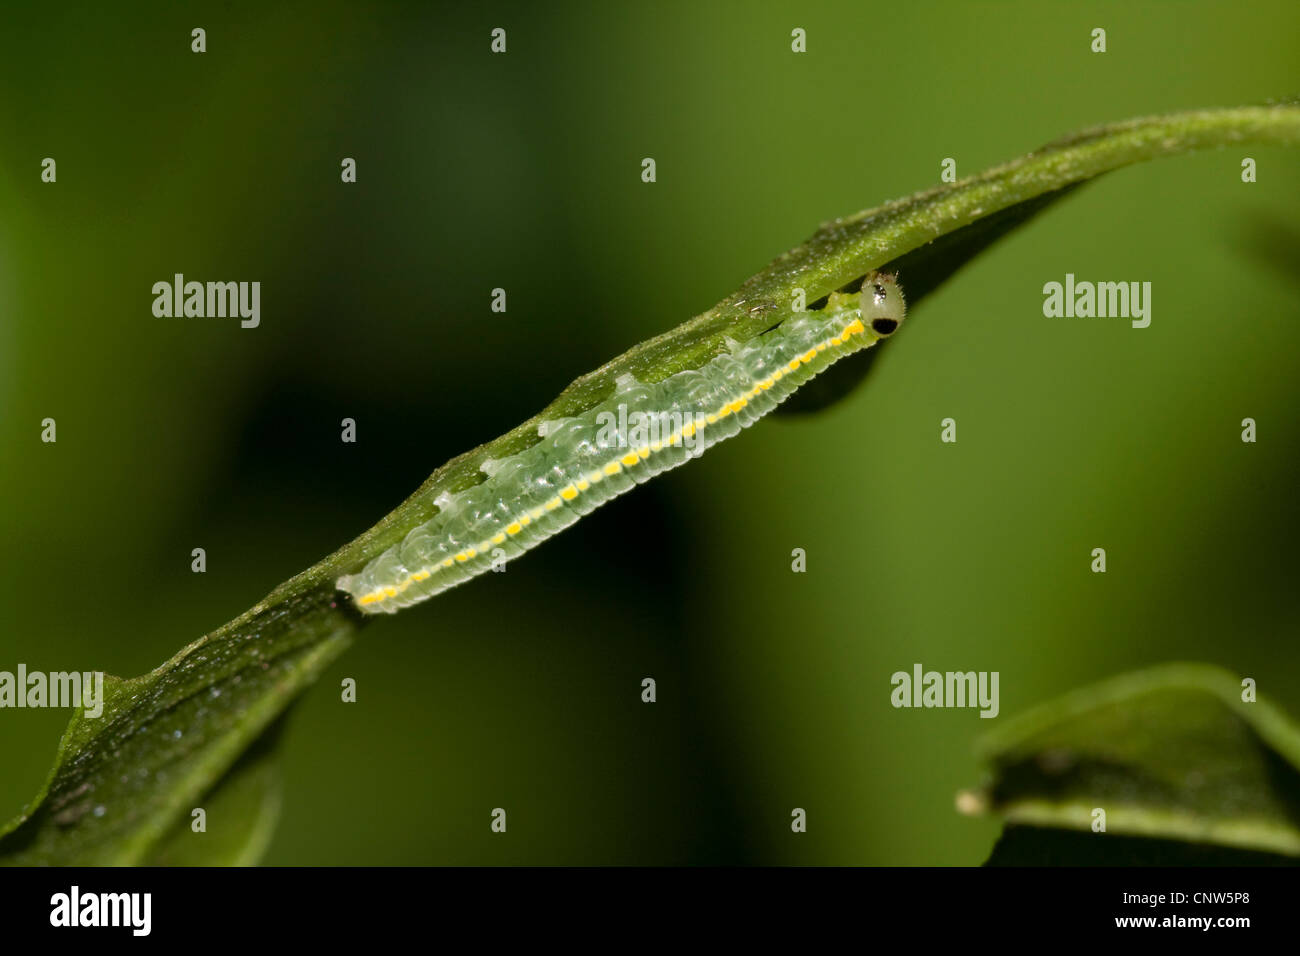 brush-footed butterfly, glasswing (Greta oto), caterpillar at a leaf Stock Photo